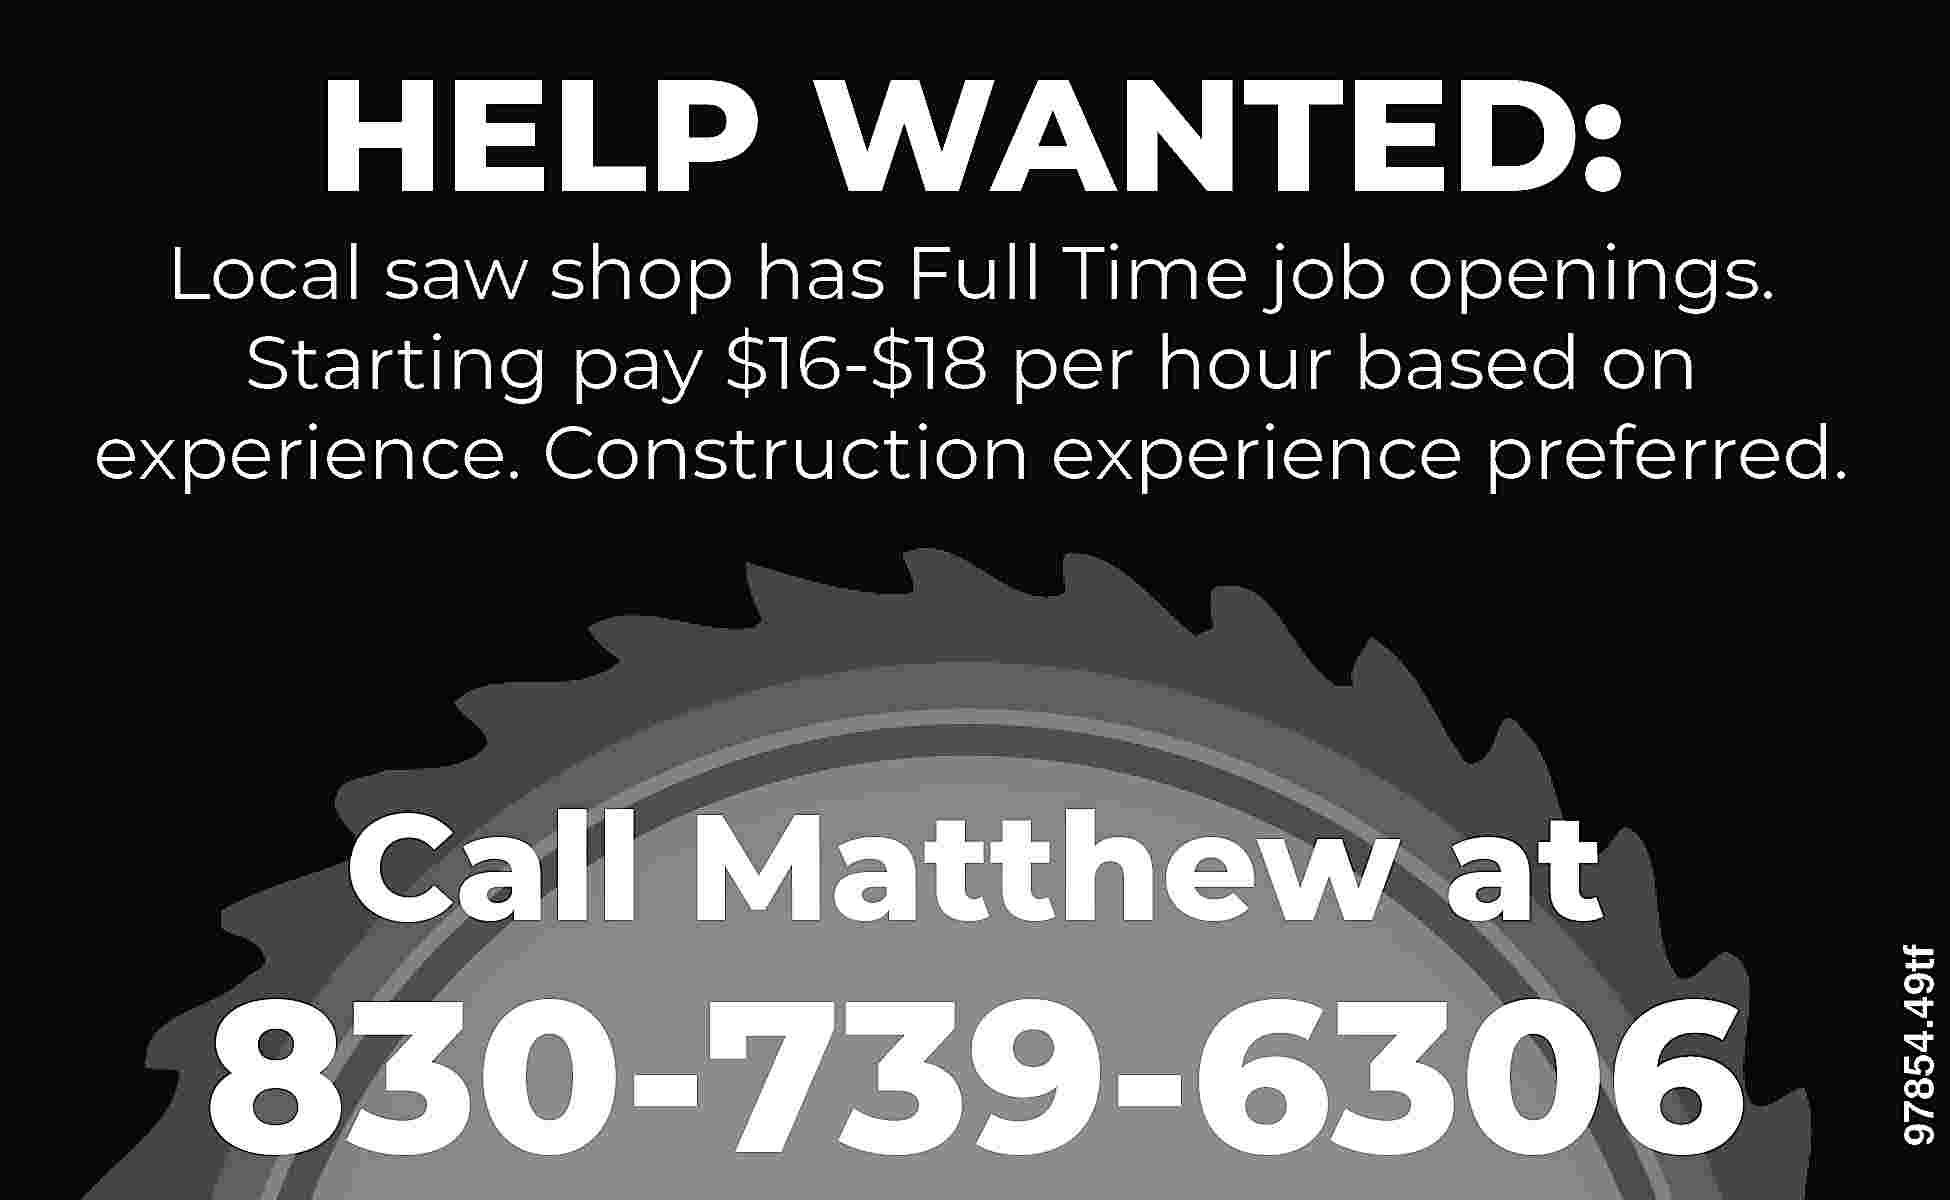 HELP WANTED: Call Matthew at  HELP WANTED: Call Matthew at 830-739-6306 97854.49tf Local saw shop has Full Time job openings. Starting pay $16-$18 per hour based on experience. Construction experience preferred.